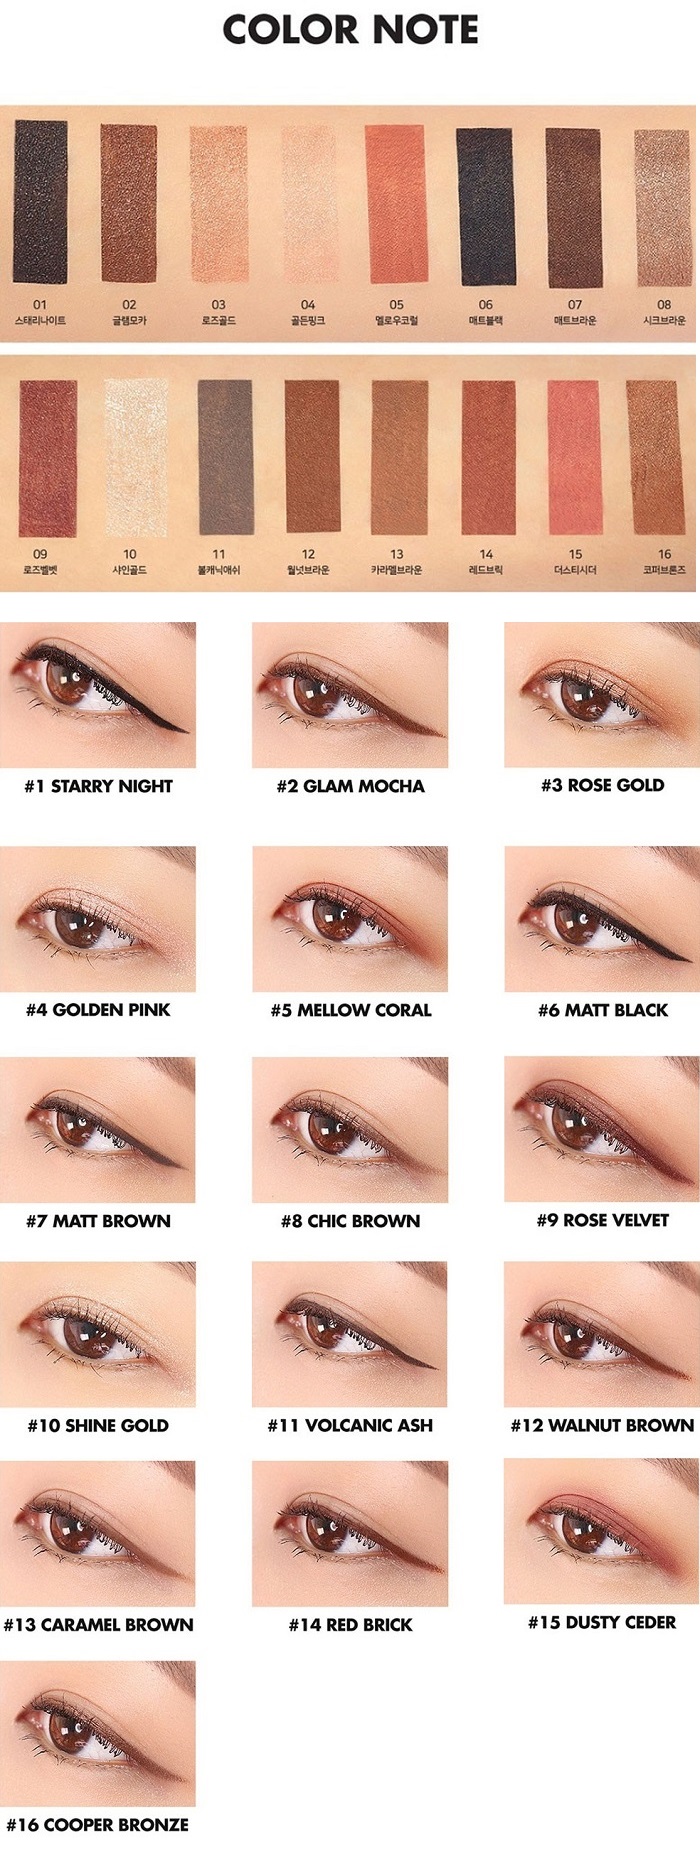 LILYBYRED Starry Eyes 9 To 9 Gel Eyeliner Mellow Coral 05 0.5g 1